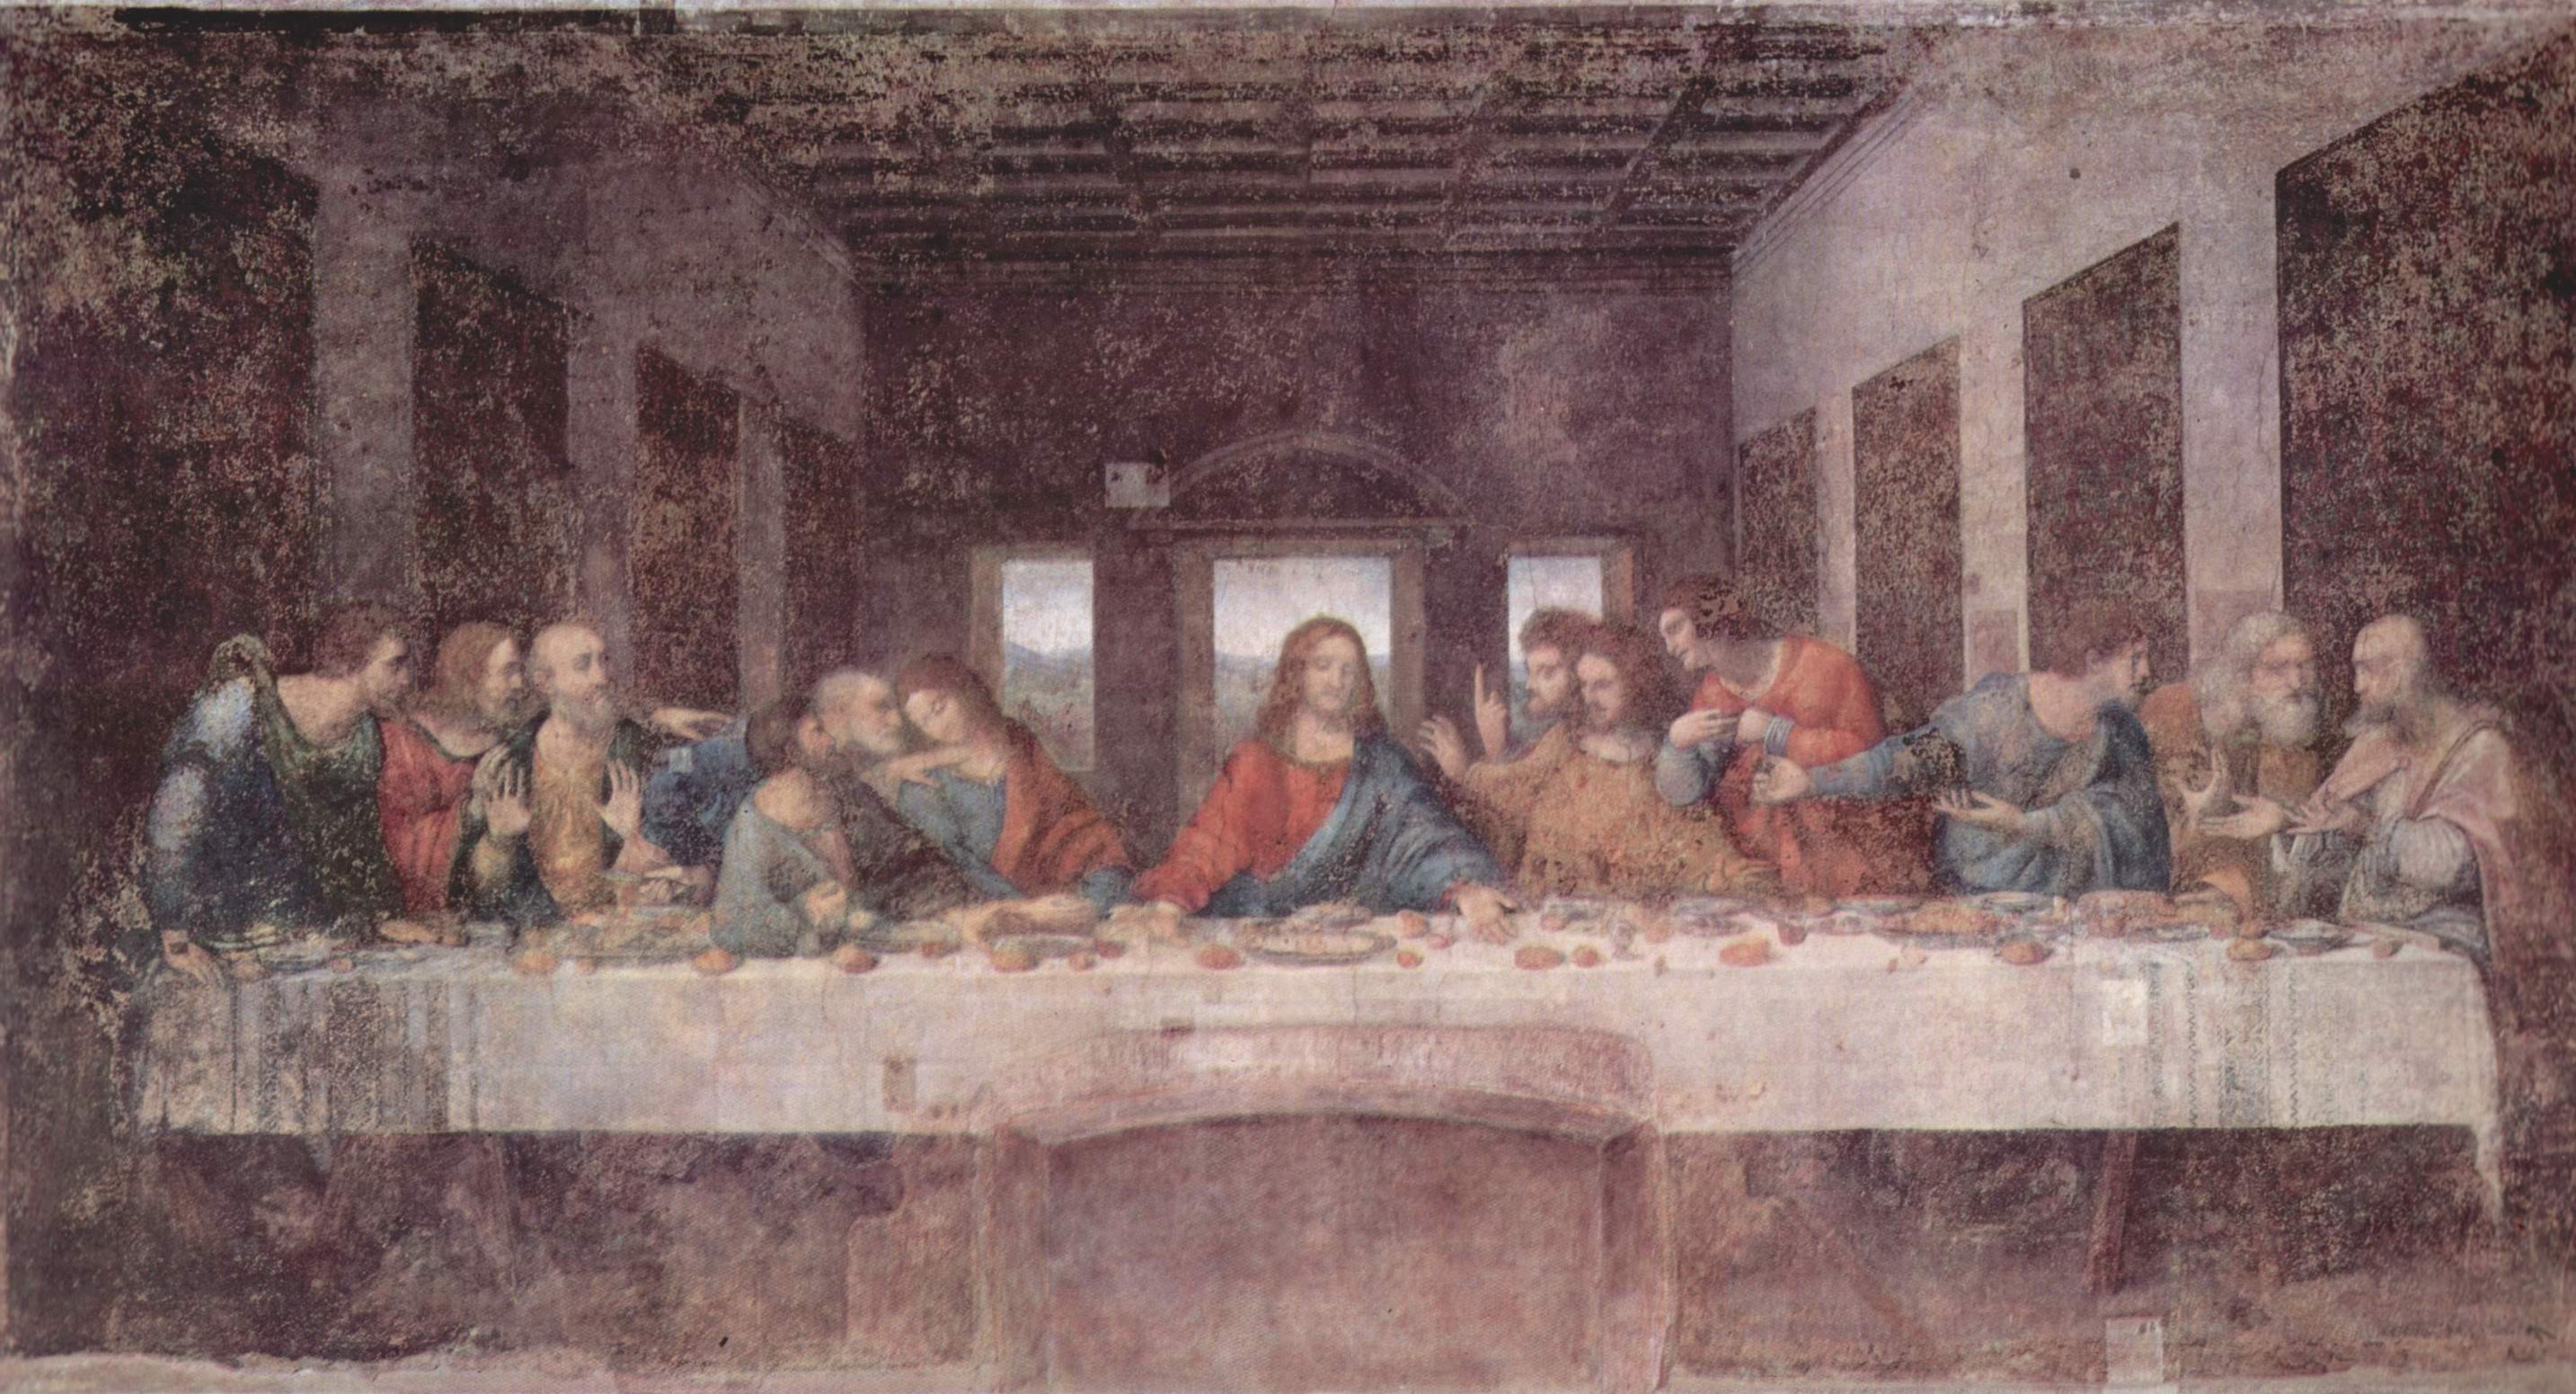 The Last Supper Painting Religious Jesus Christ 2867x1551